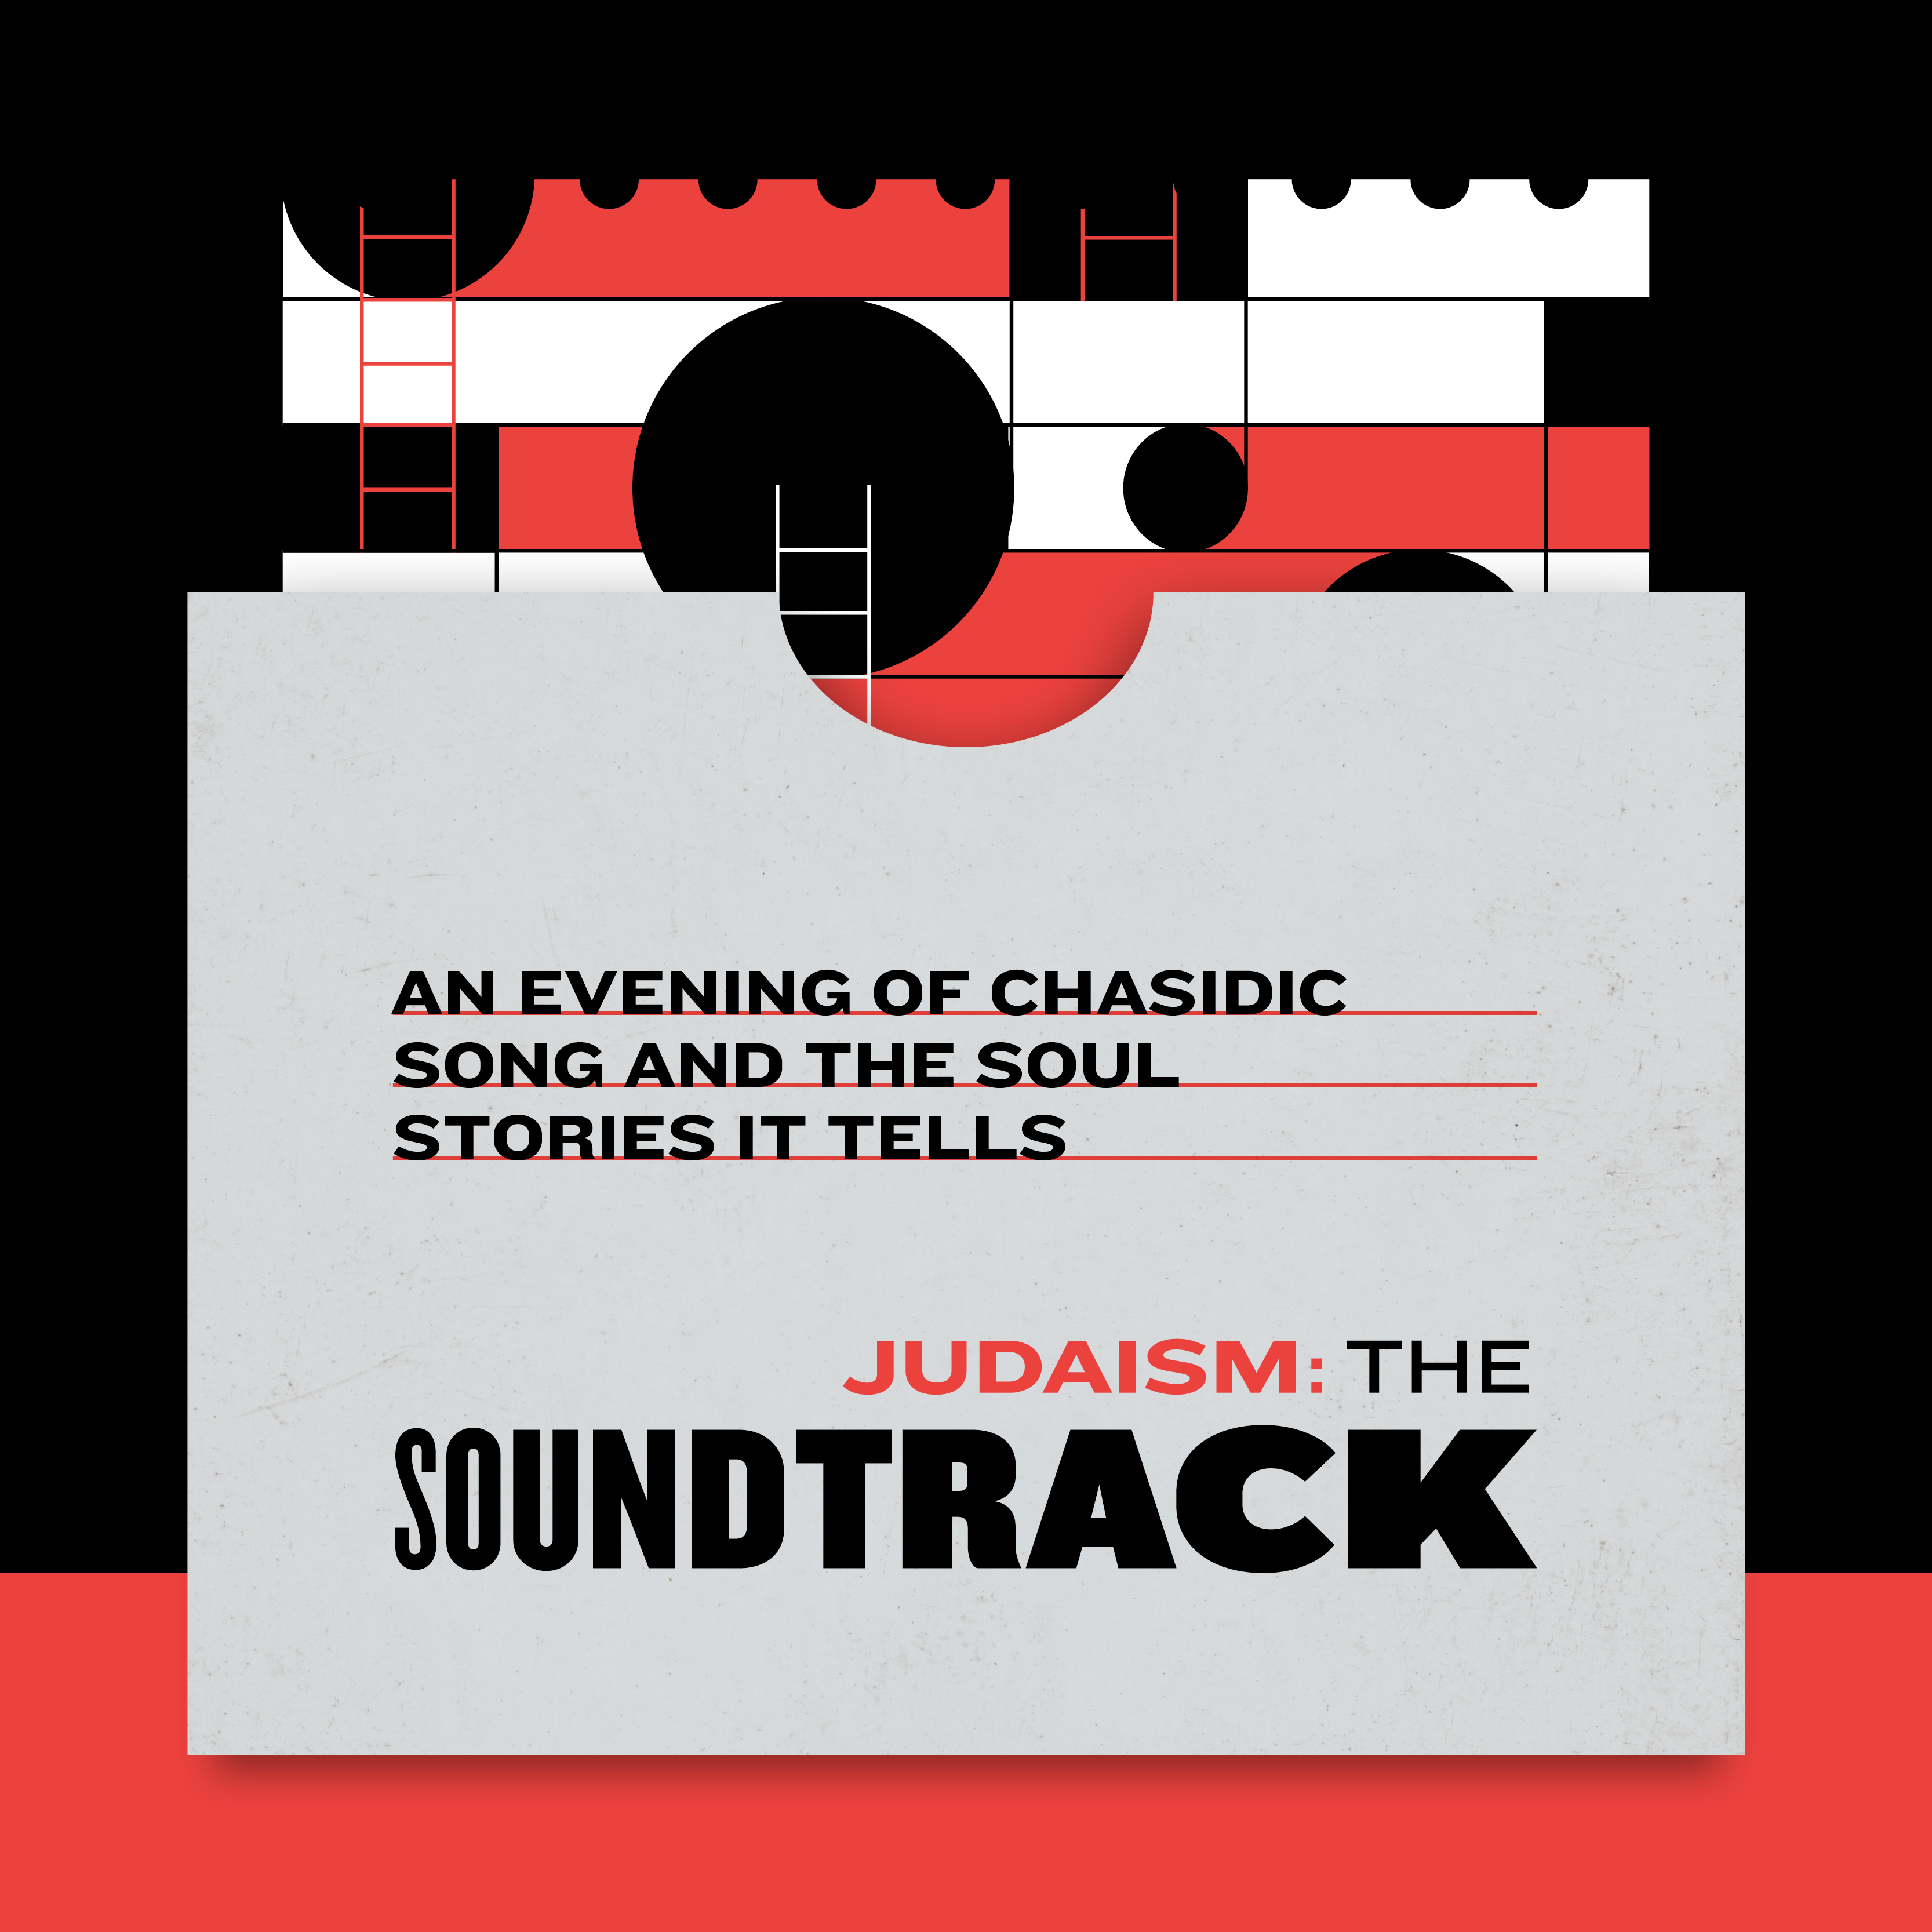 Judaism: The Soundtrack. An Evening of Chasidic Song and the Soul Stories It Tells